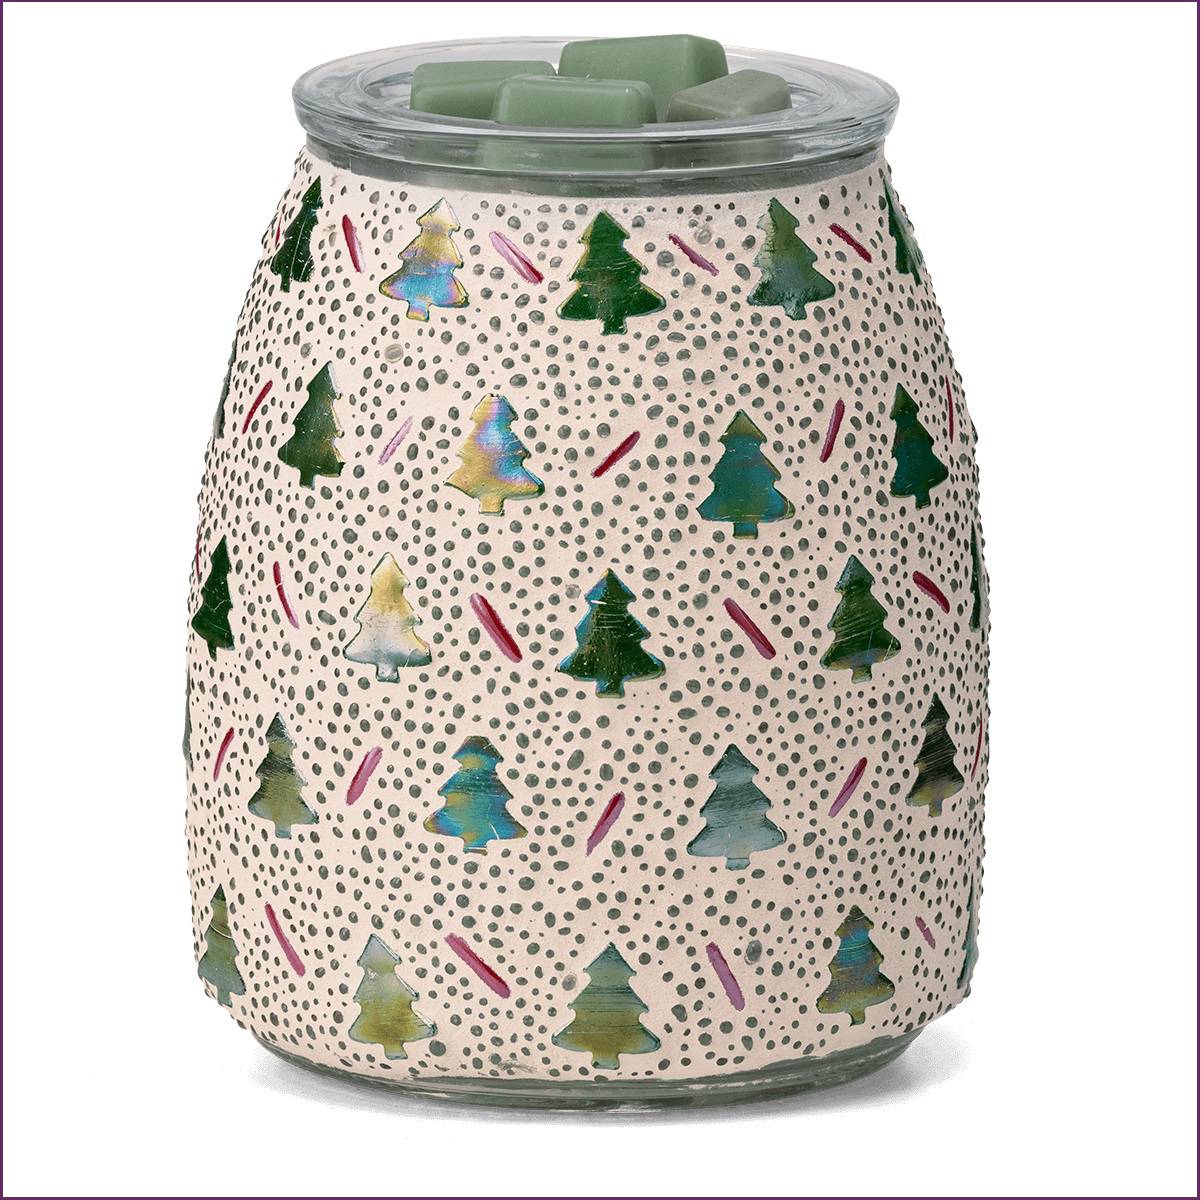 Merry Mosaic Scentsy Warmer | Bars Off